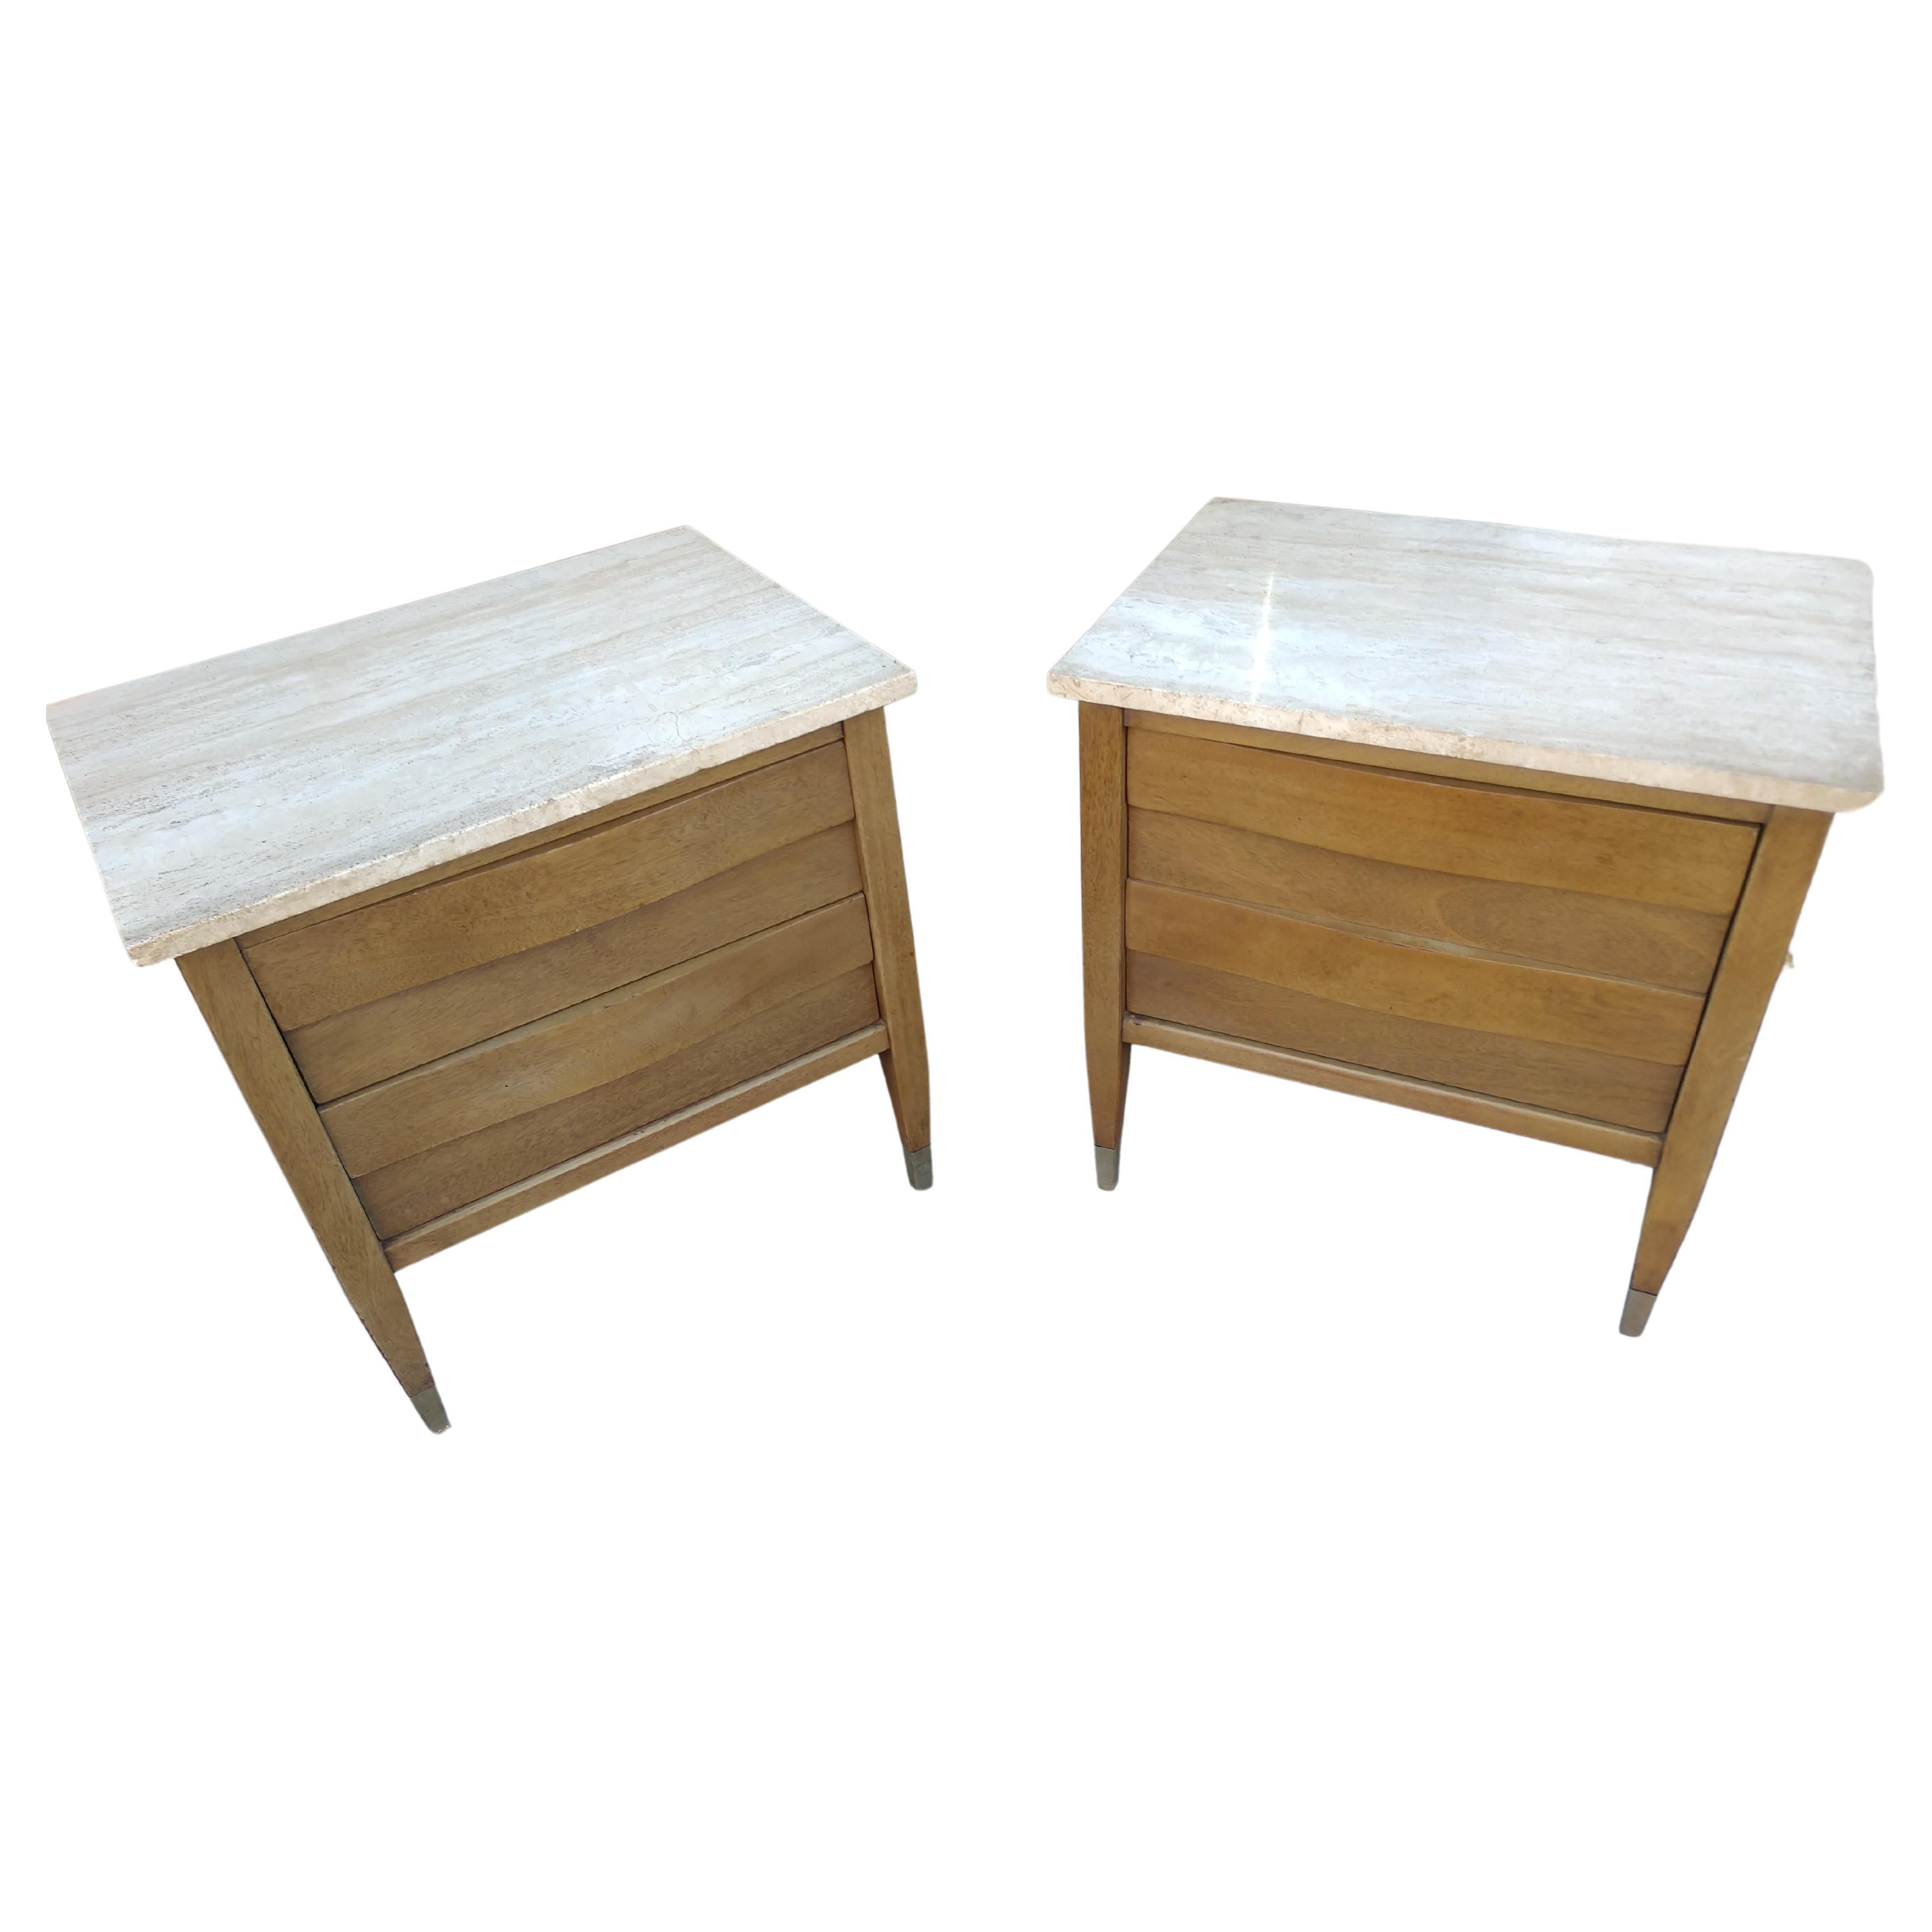 Fantastic 2 drawer end tables or night stands by American of Martinsville with Travertine marble tops. Curved wave front design to drawers. Nickel sabots on the legs. In excellent vintage condition with minimal wear. Only issues to speak of, very